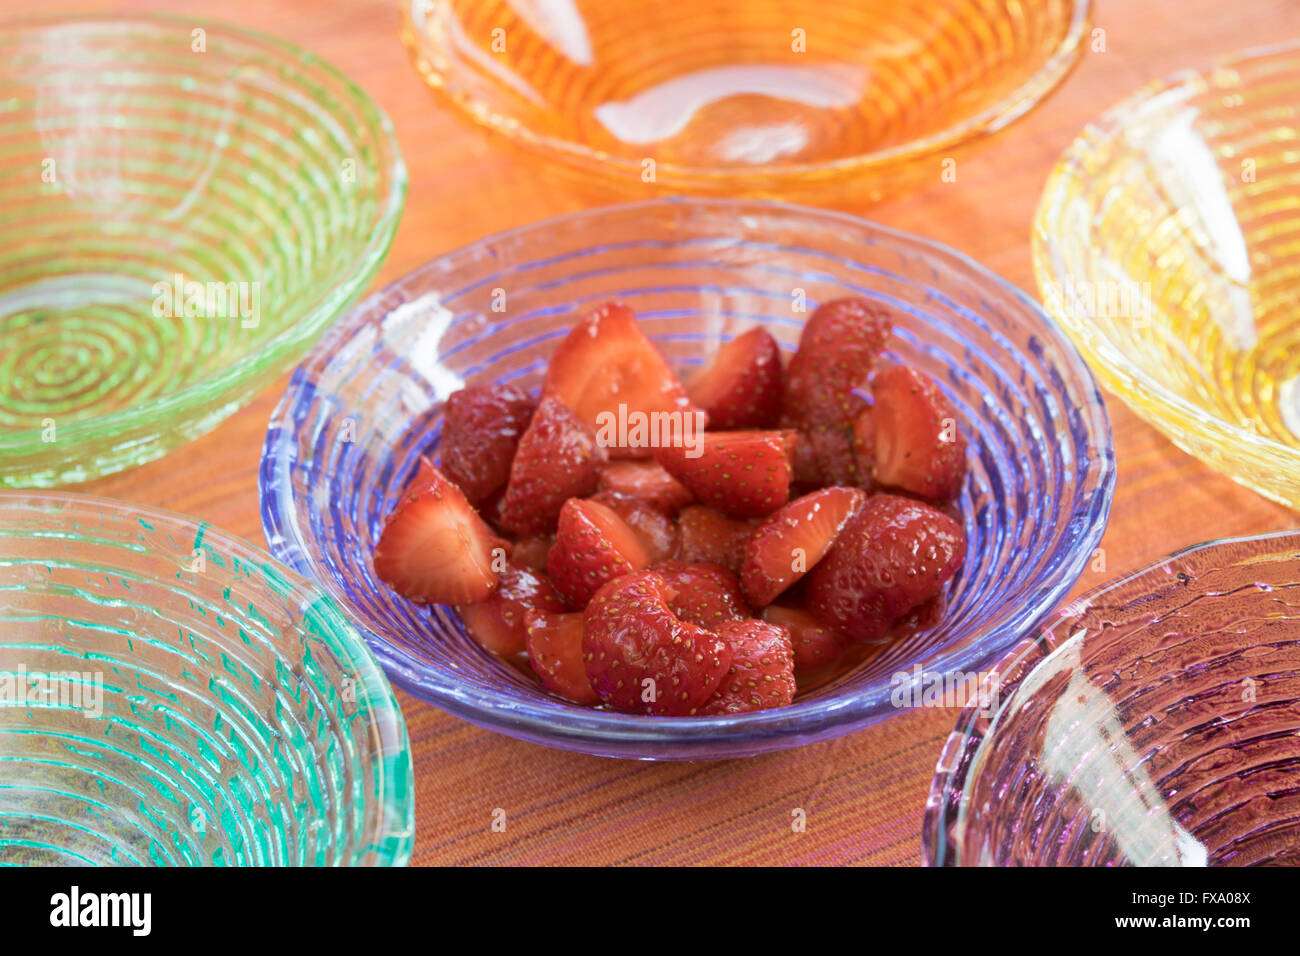 strawberry salad in a sequence of colored glass bowls Stock Photo